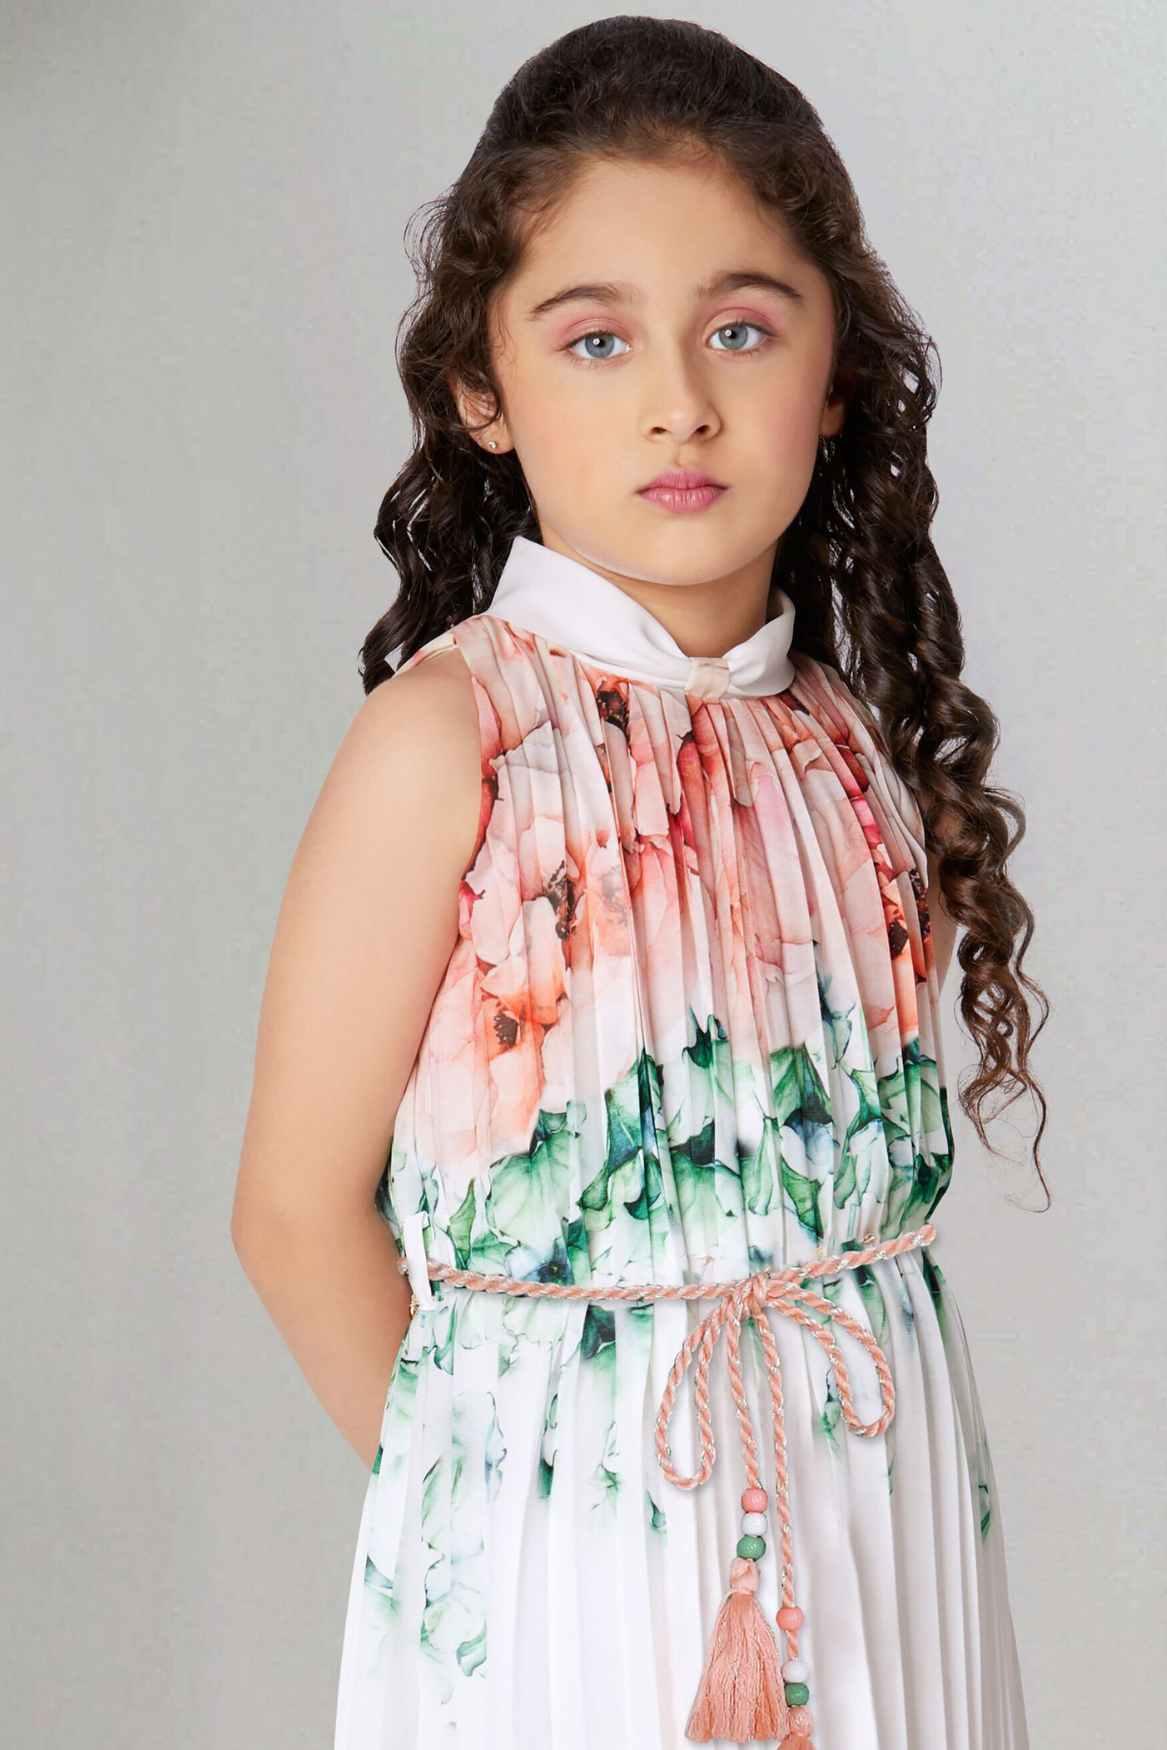 Stylish White Dress With Floral Print For Girls - Lagorii Kids